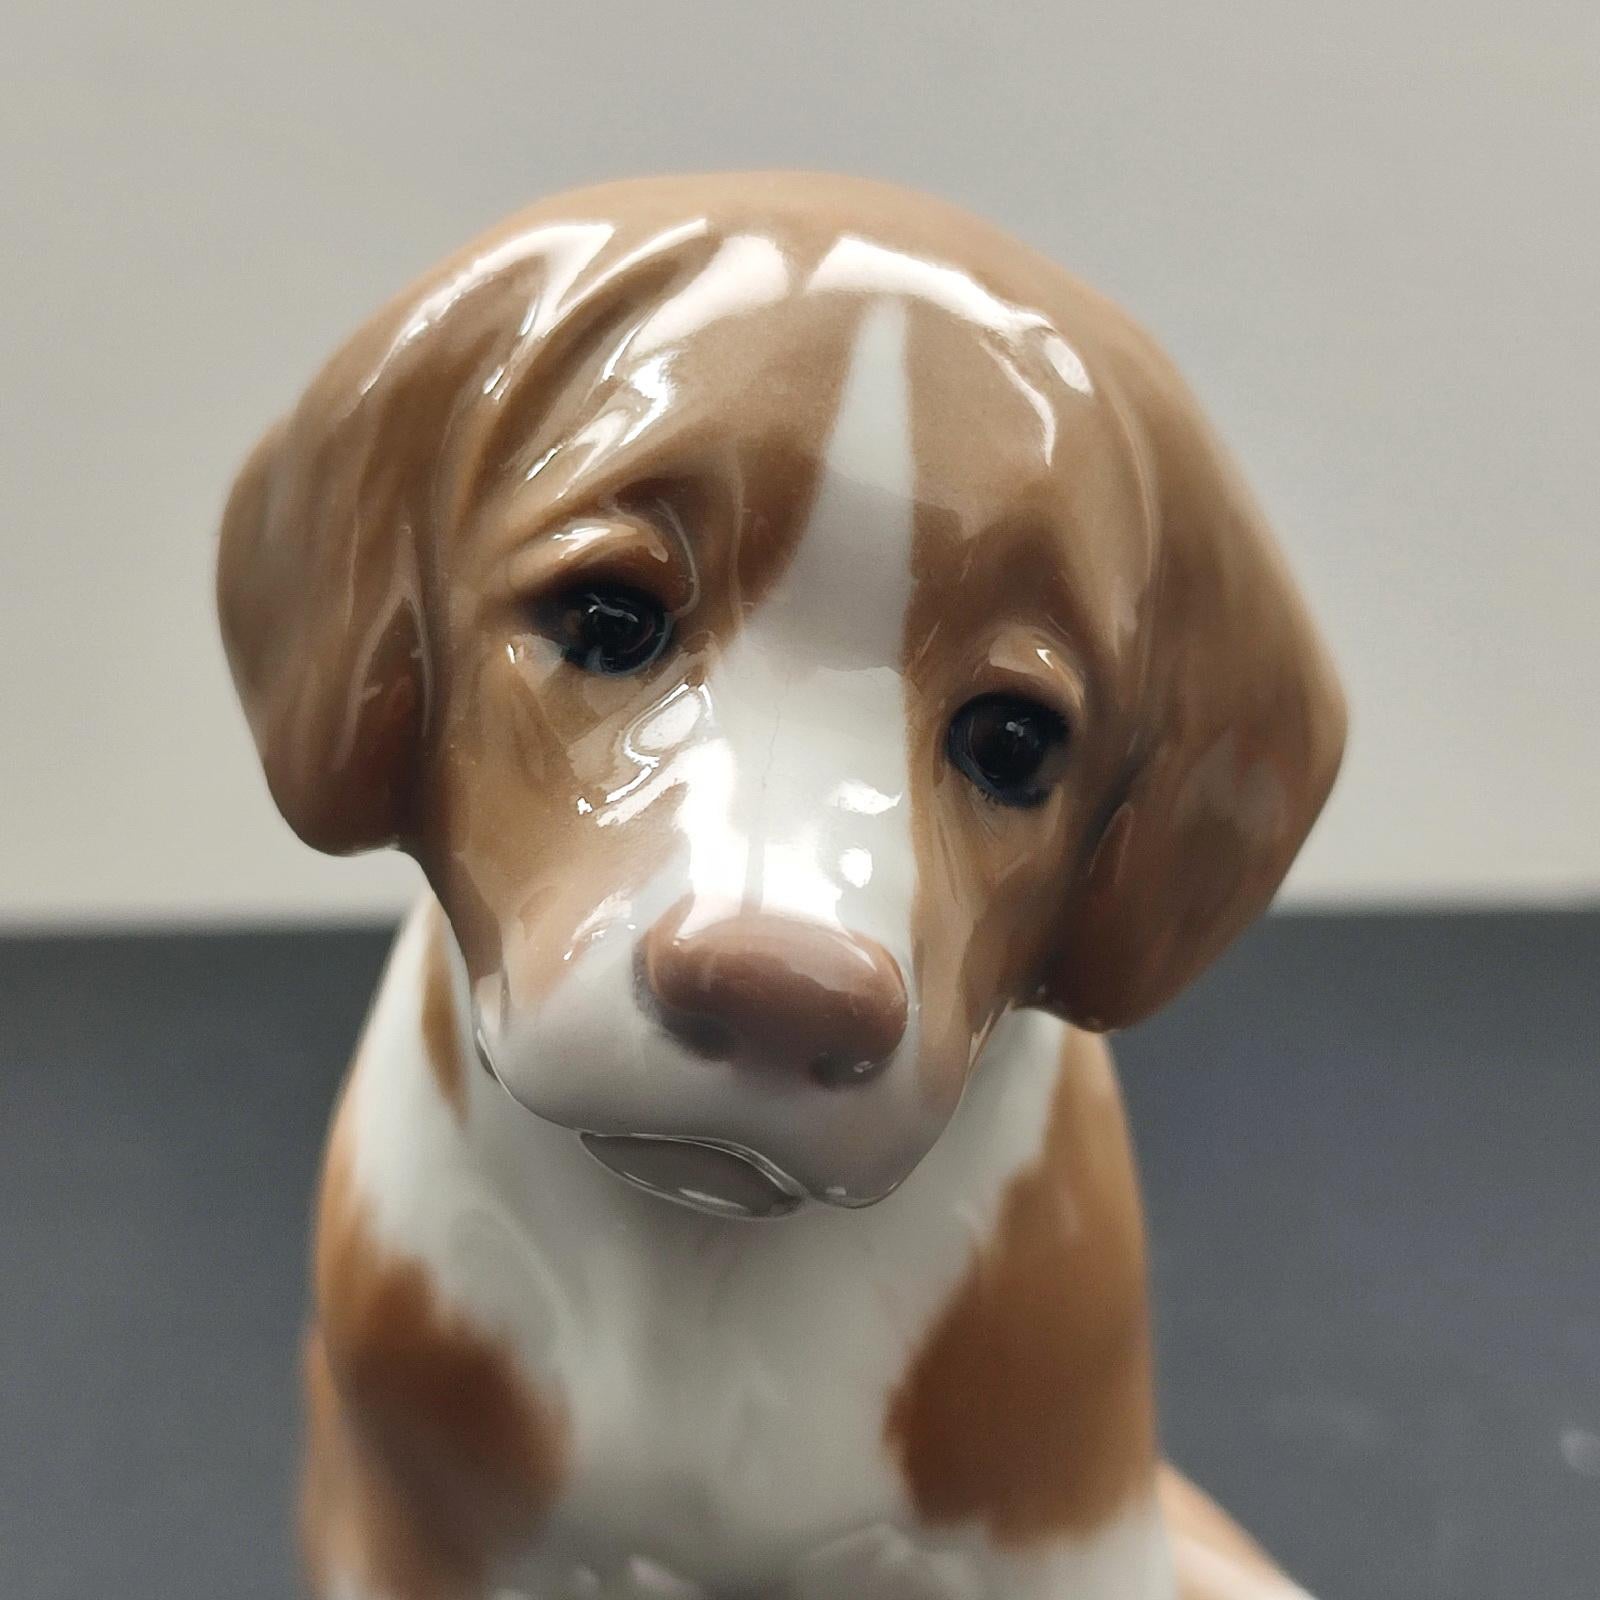 Bing & Grondahl St. Bernard puppy figurine. Designed by: Niels Nielsen.
Older mark B&G from the 1940s, form number No.:1926 
Good condition, thin riss in the glaze under the bottom.

Height: 12 cm [4.73 in]